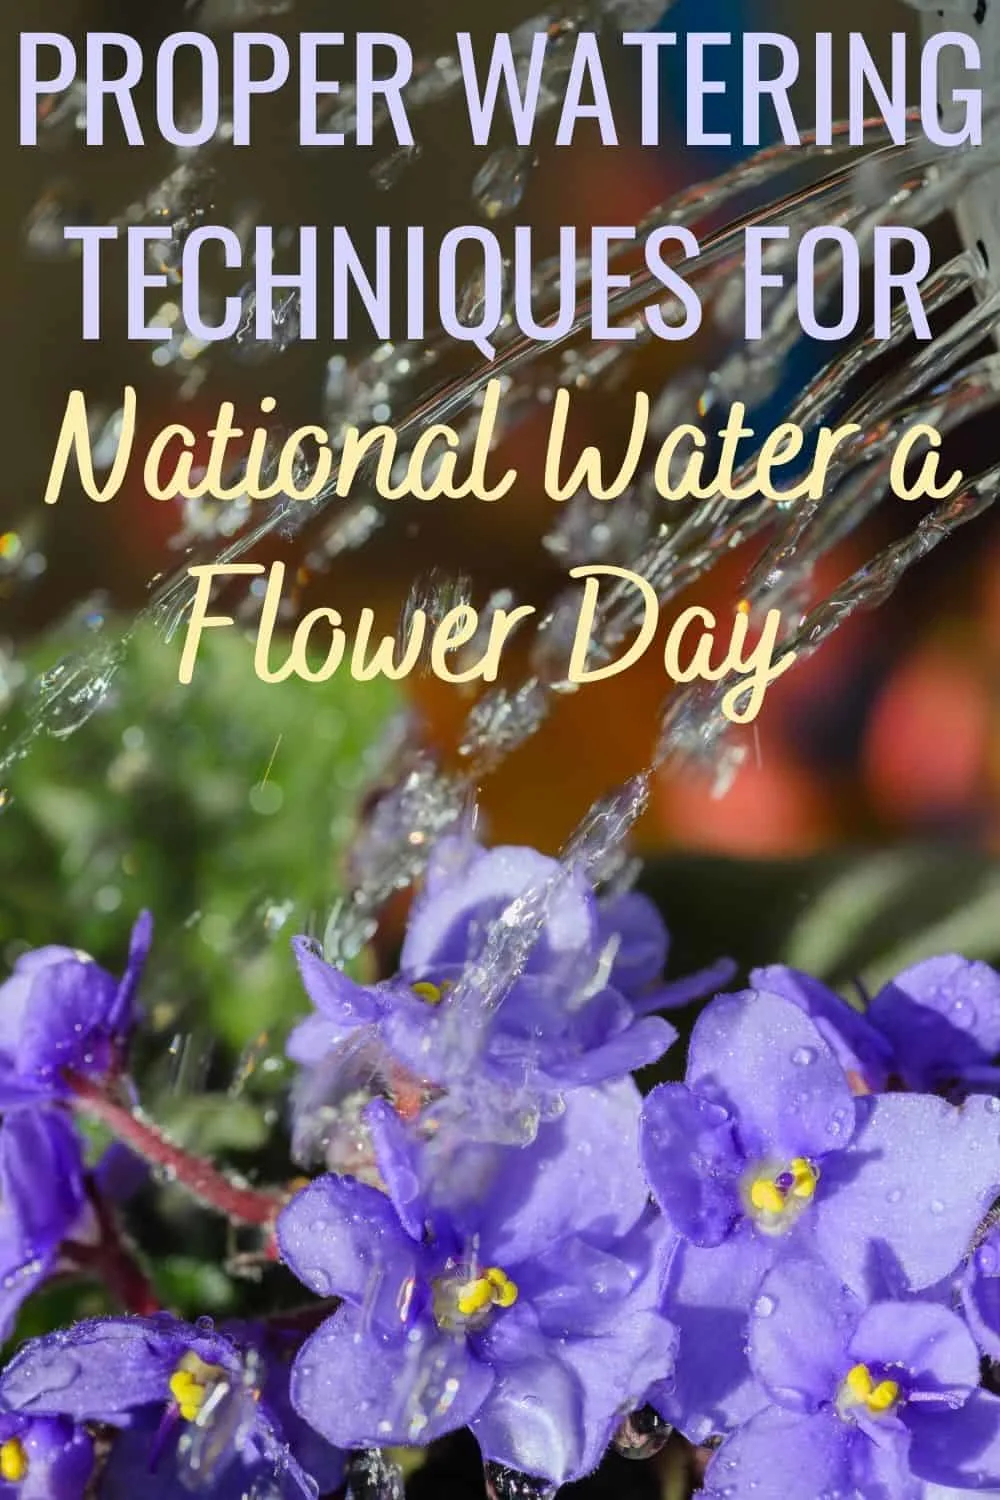 Proper Watering Techniques for National Water a Flower Day